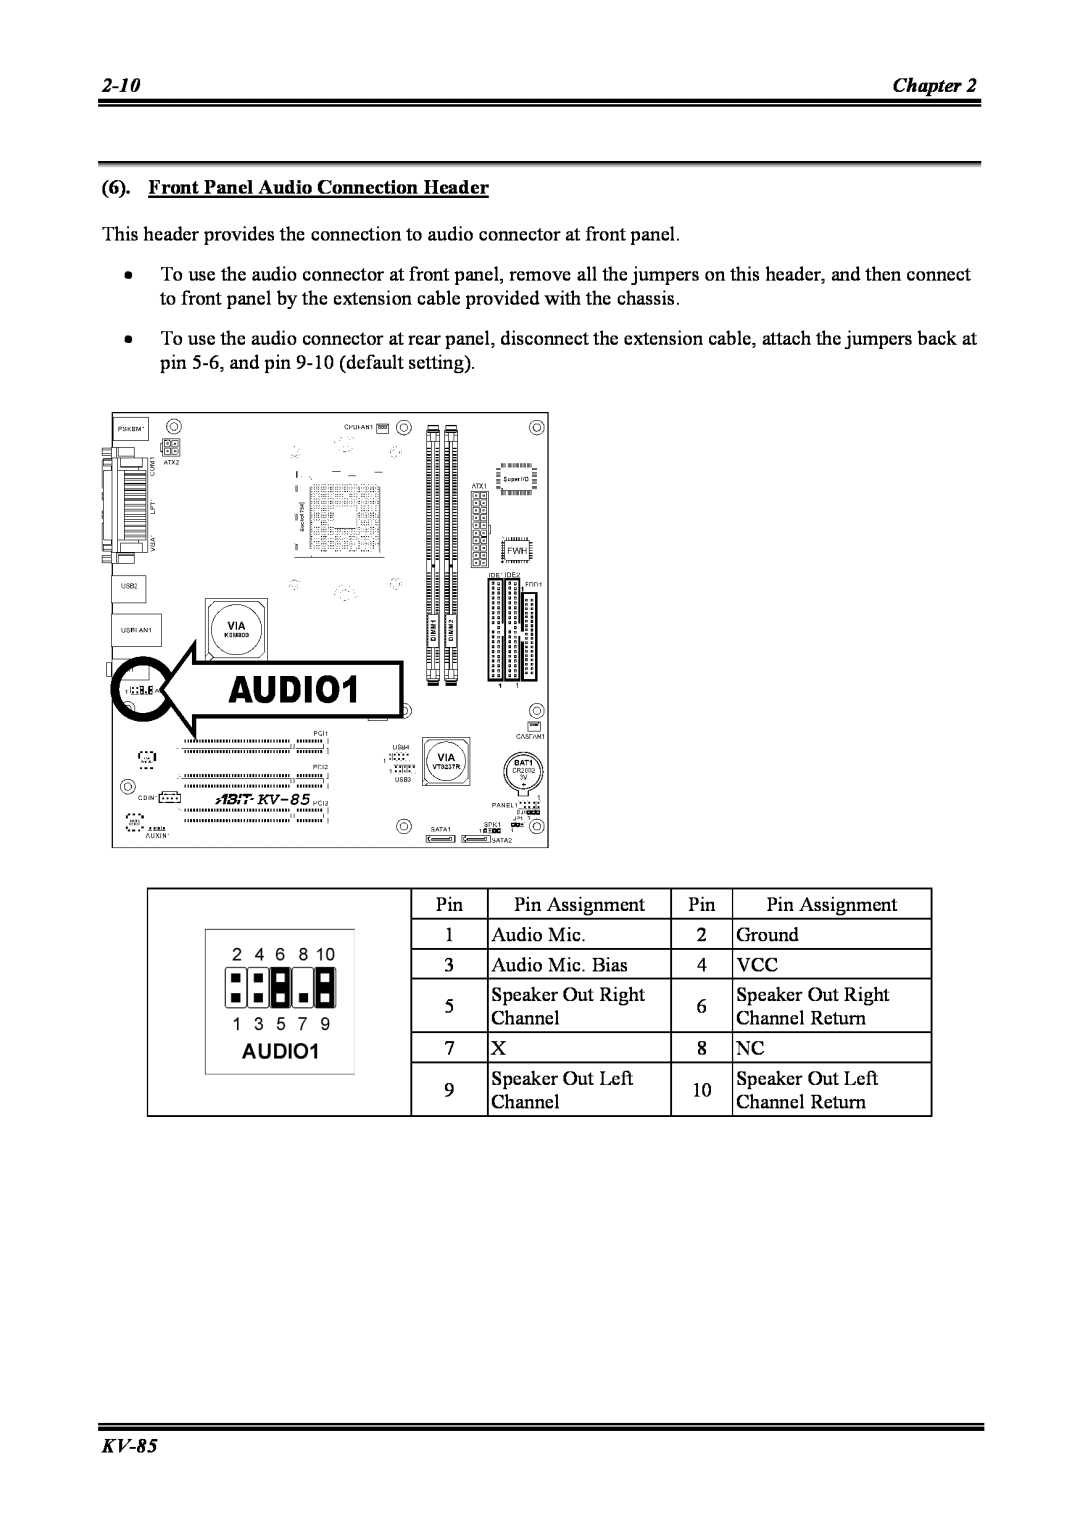 Abit KV-85 user manual Chapter, Front Panel Audio Connection Header 